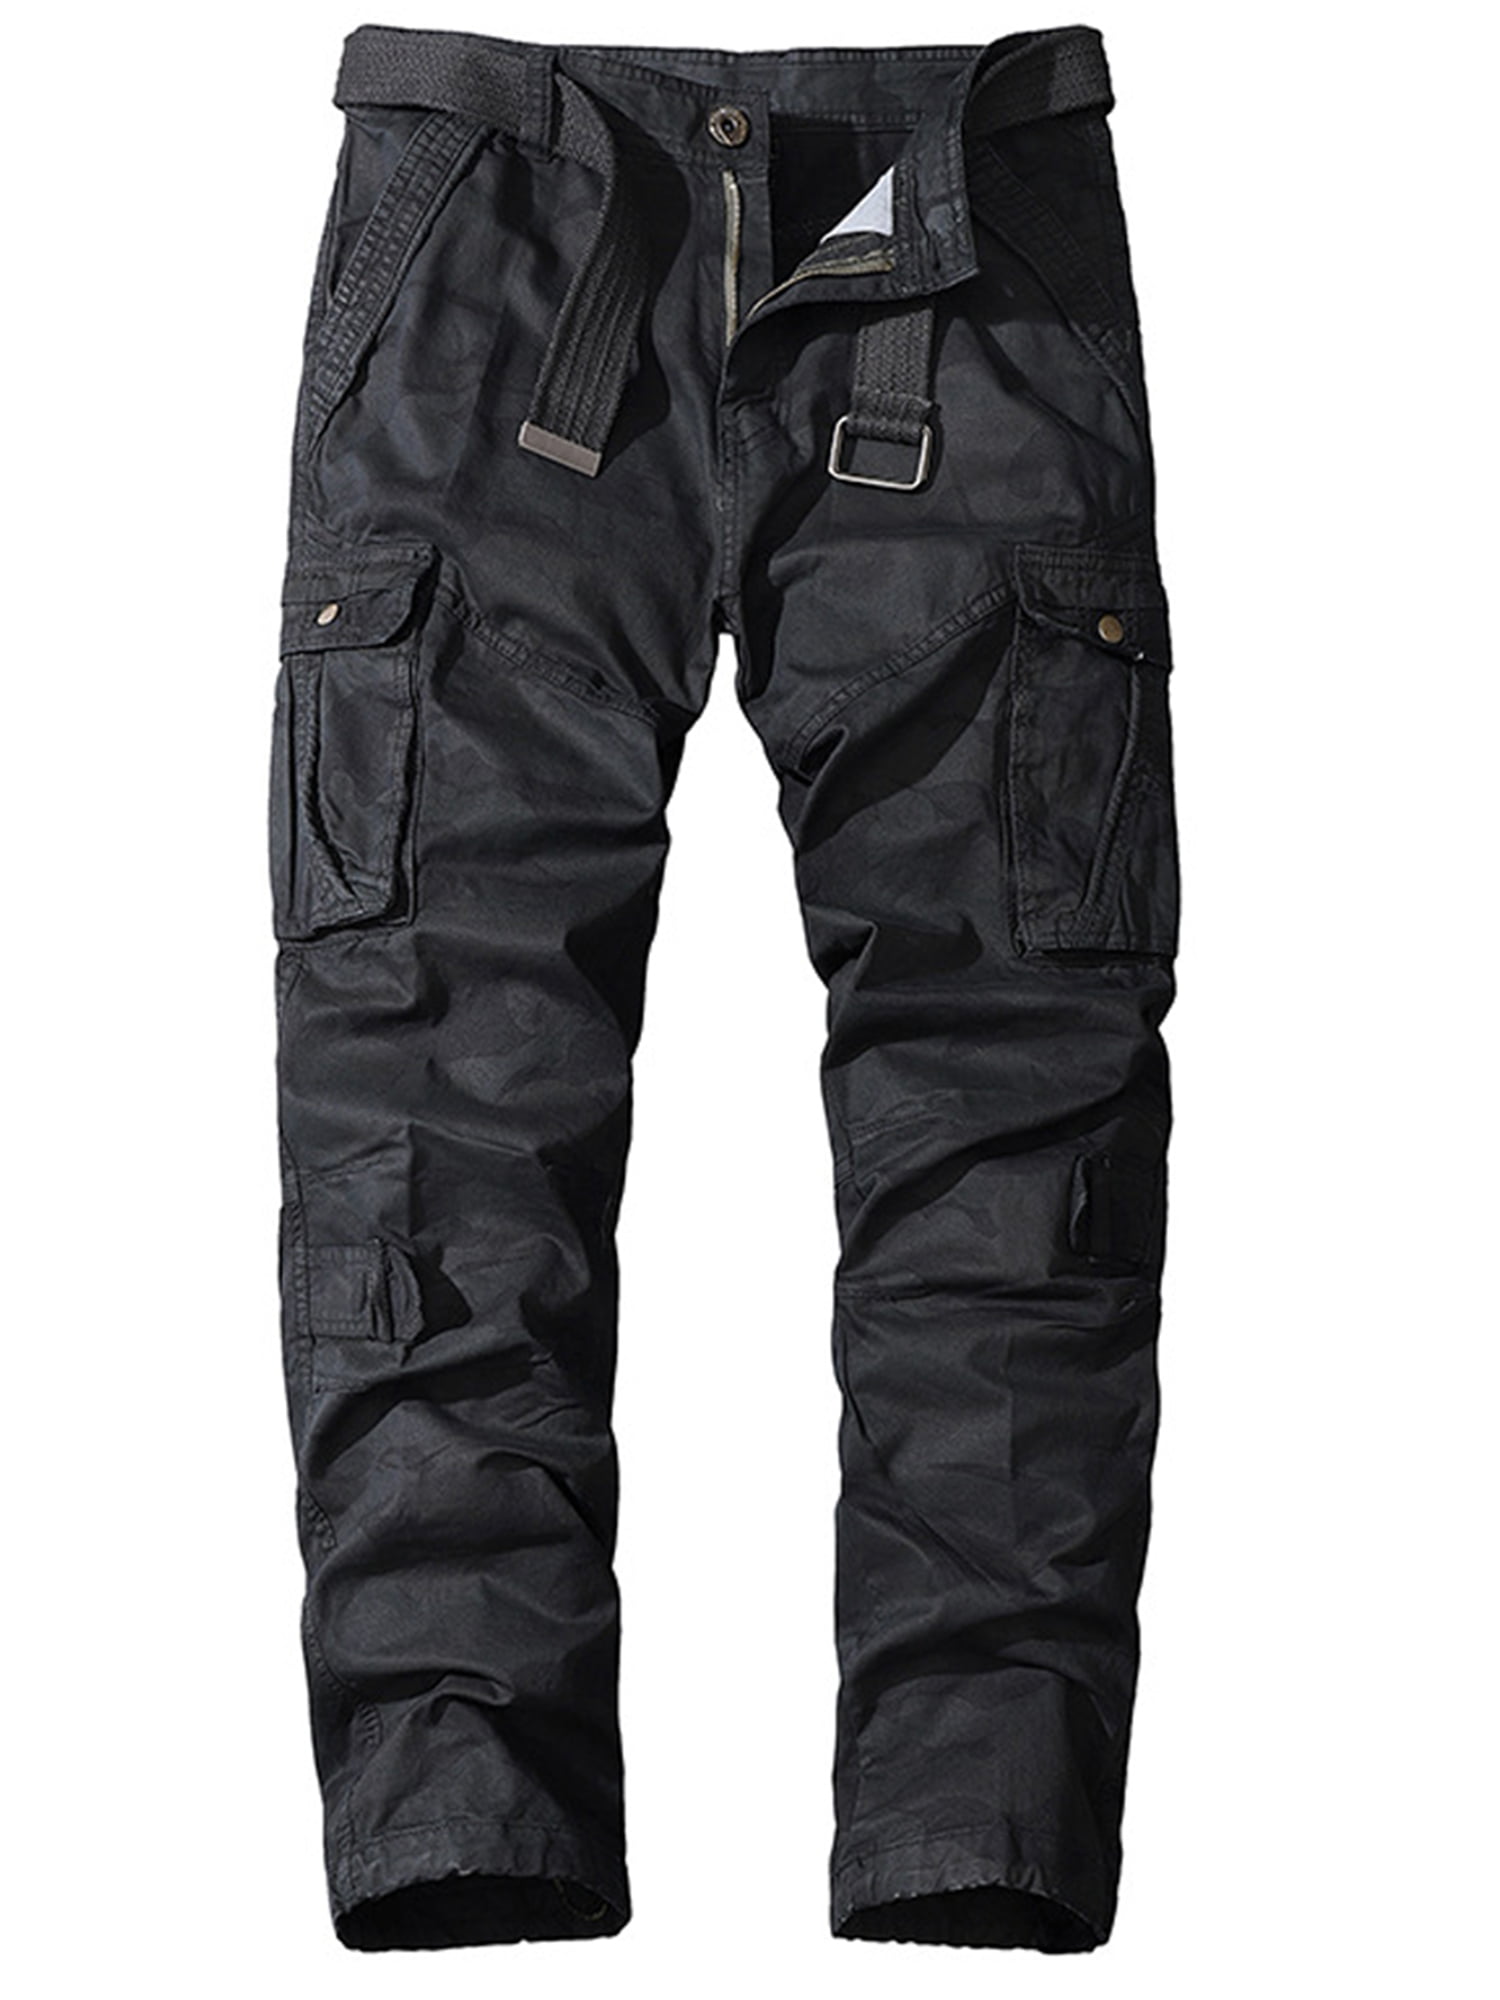 Man Outdoor Slim Shell Thermal Casual Trousers Combat Work Wear Pants Bottom 